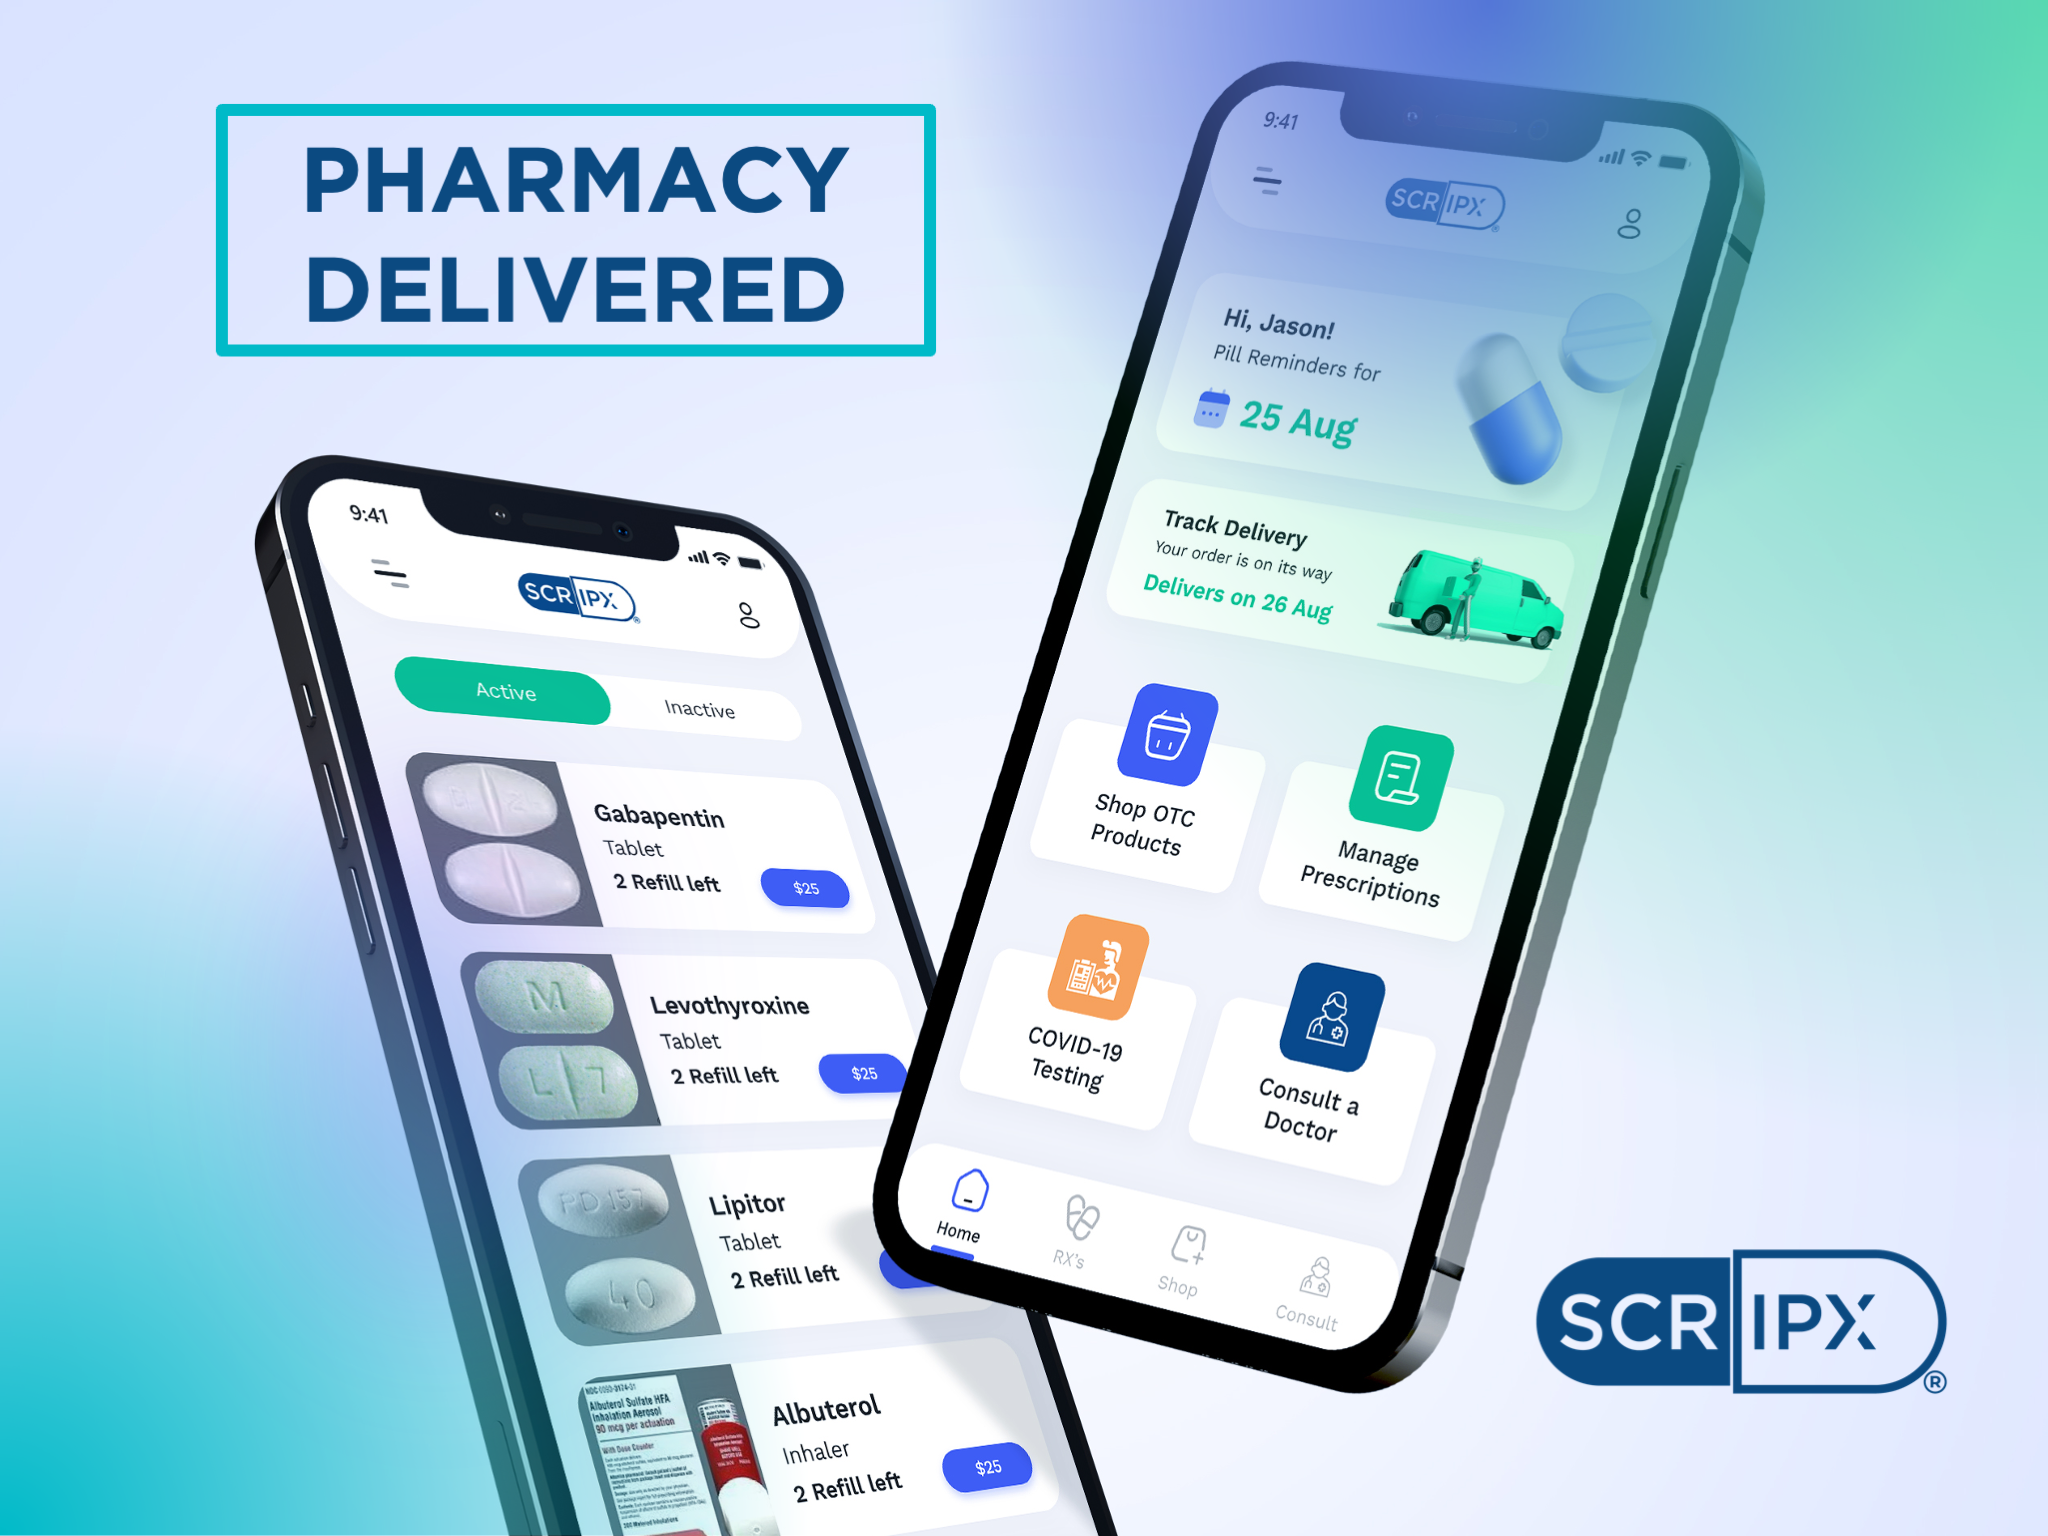 Scripx Pharmacy Launches $1.07 Million Pre-Seed Round on Equity Crowdfunding Platform Republic for expansion and growth.